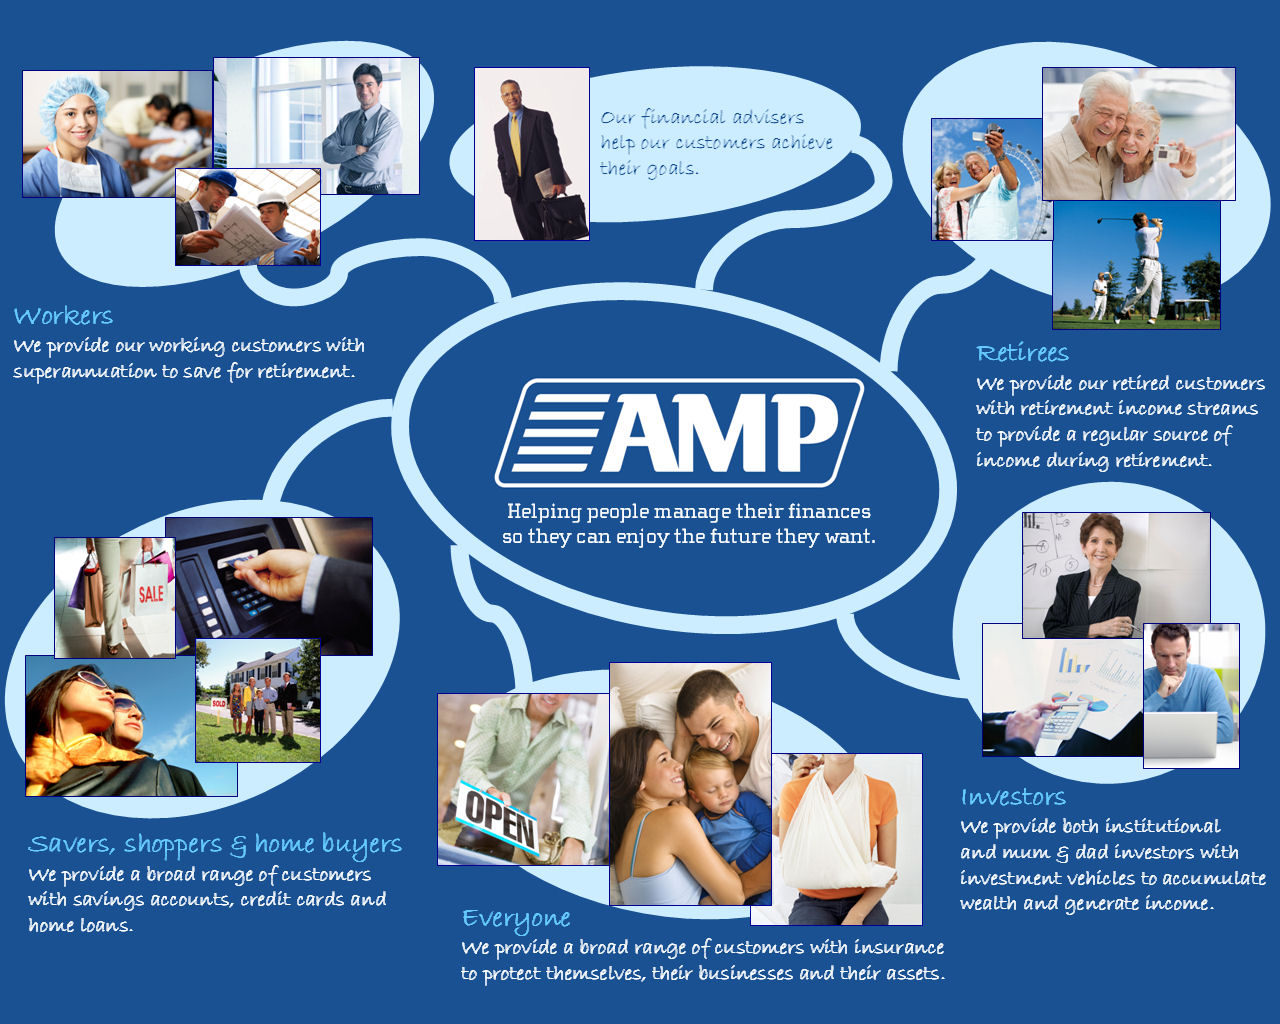 Infographic explaing what AMP does.